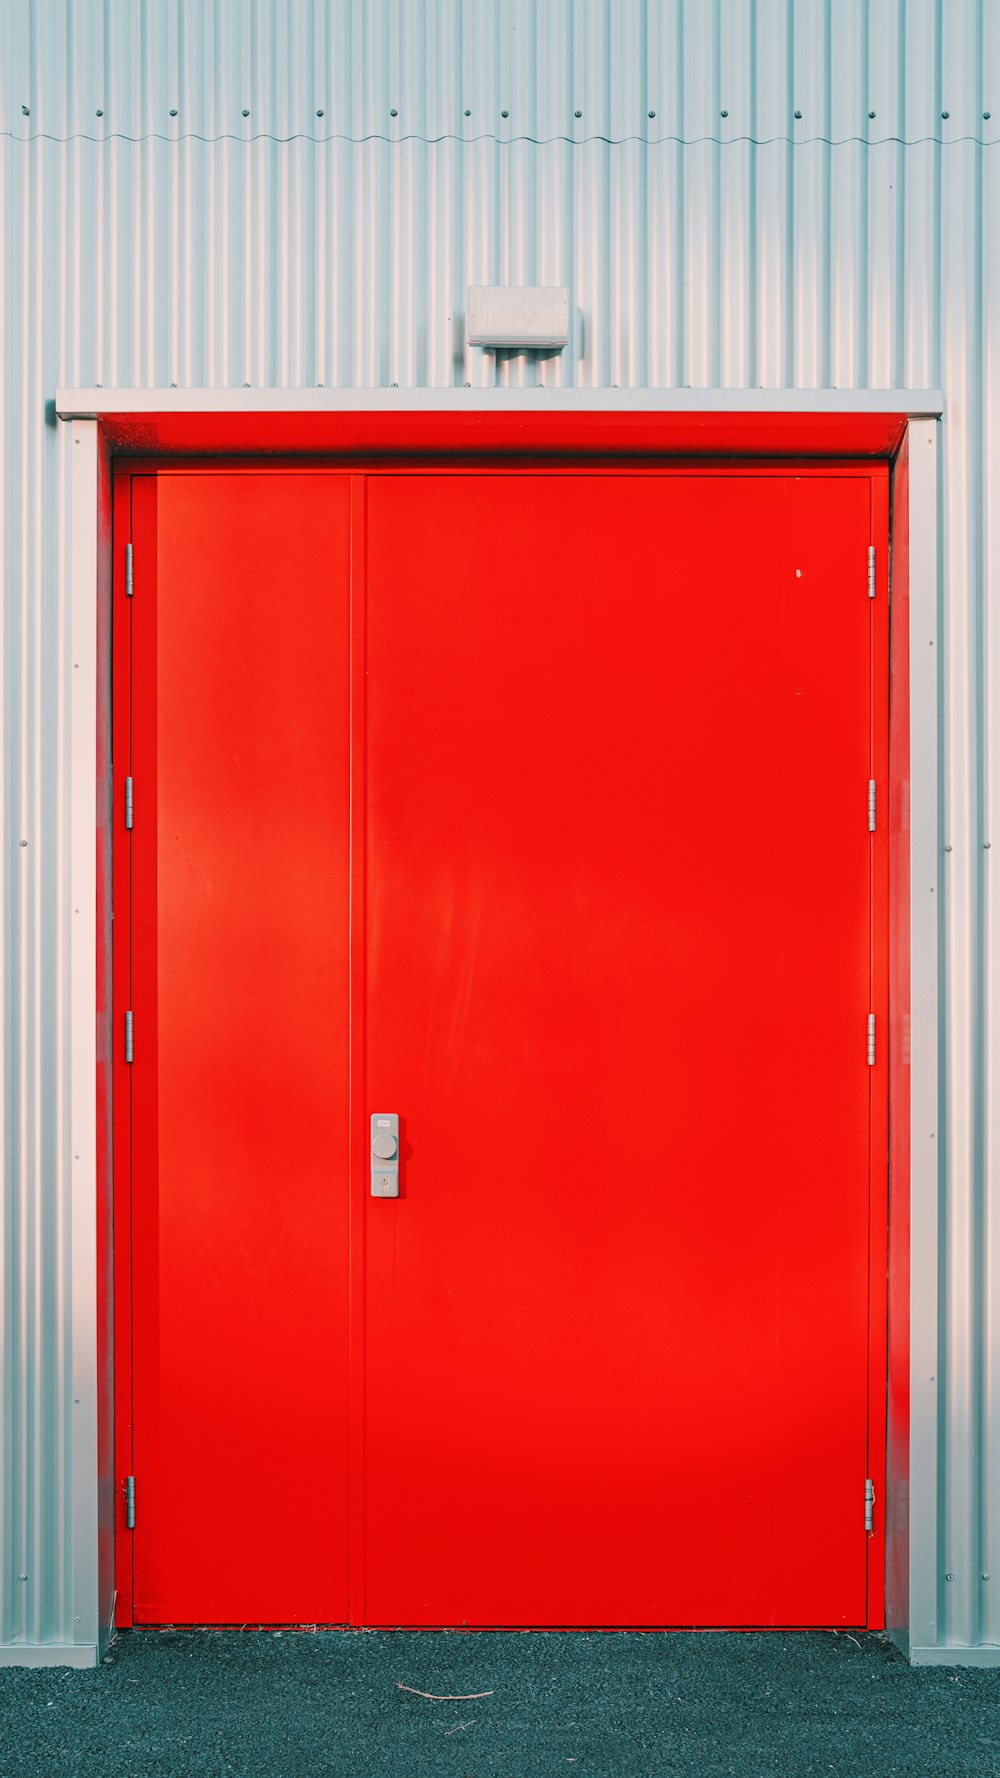 a red door with a white box on the top